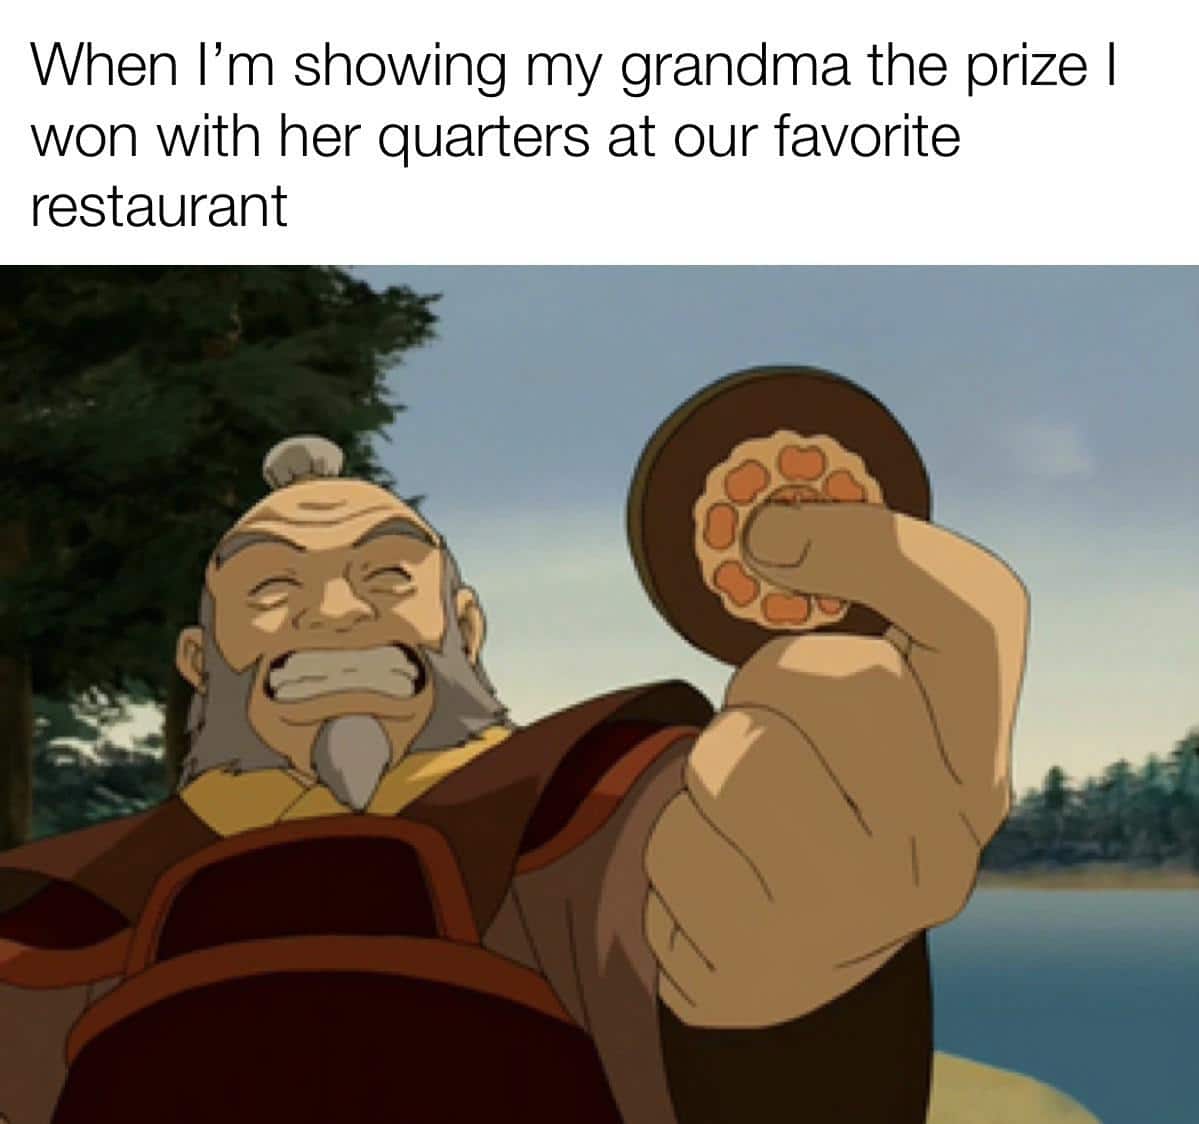 Wholesome memes, Uncle Iroh, Uncle, SOLDIER BOY COMES MARCHING HOMES Wholesome Memes Wholesome memes, Uncle Iroh, Uncle, SOLDIER BOY COMES MARCHING HOMES text: When I'm showing my grandma the prize I won with her quarters at our favorite restaurant 